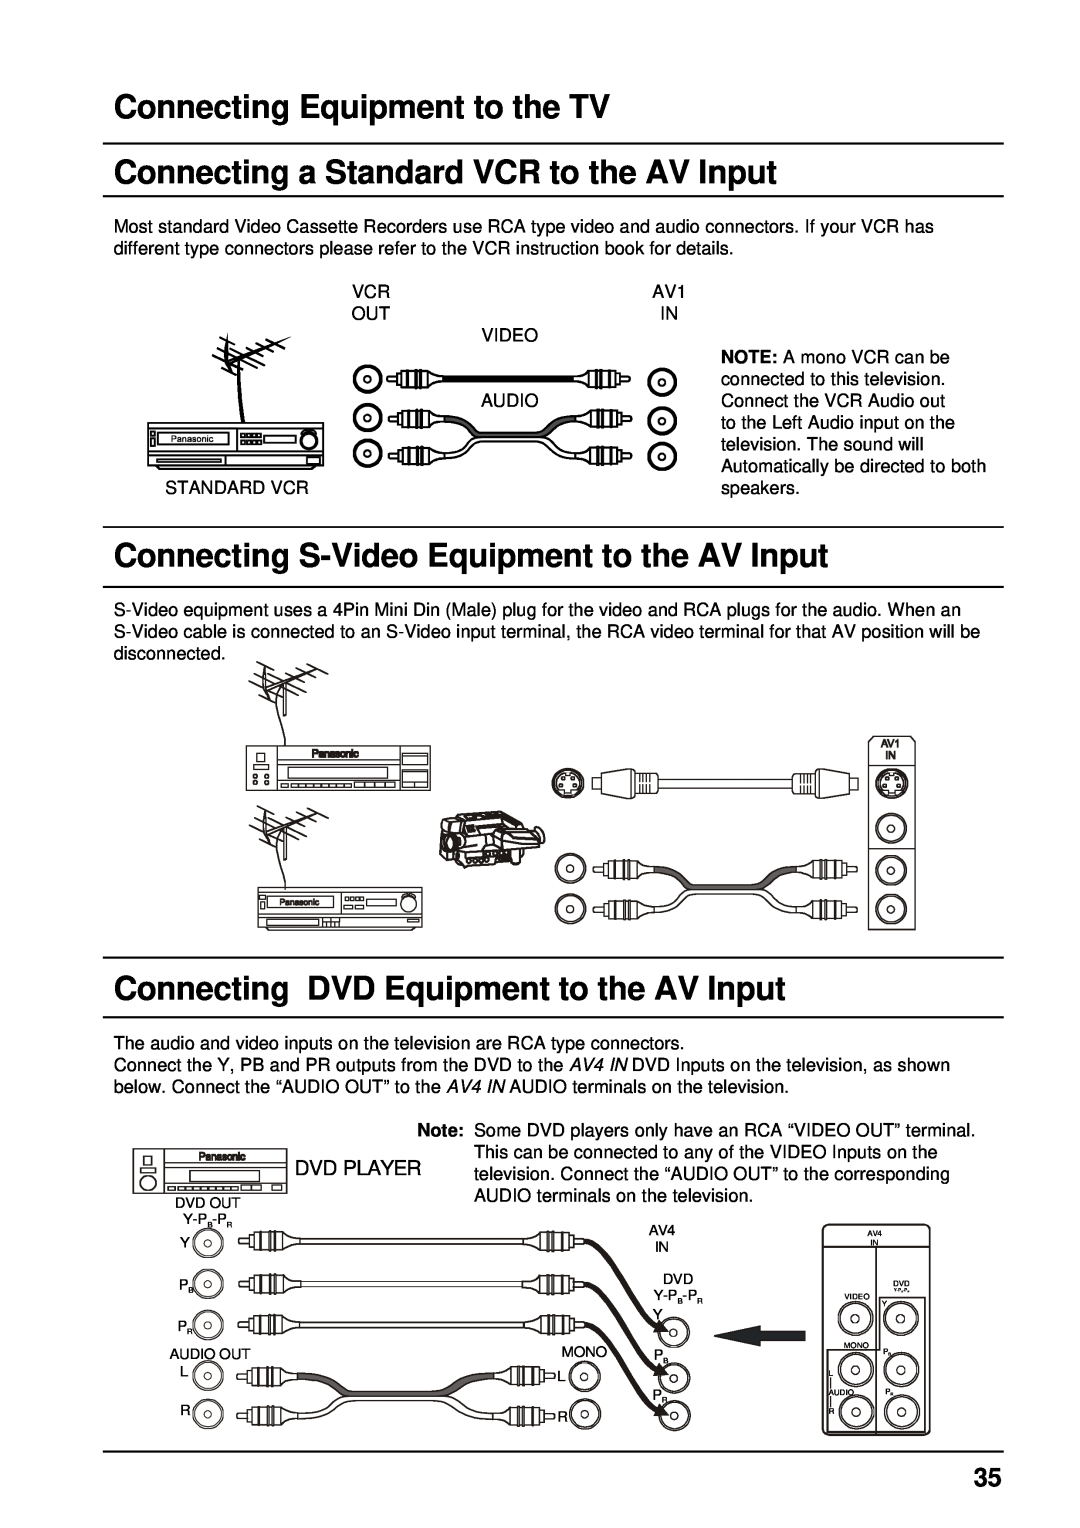 Panasonic TX-68P200A Connecting a Standard VCR to the AV Input, Connecting S-Video Equipment to the AV Input, Dvd Player 